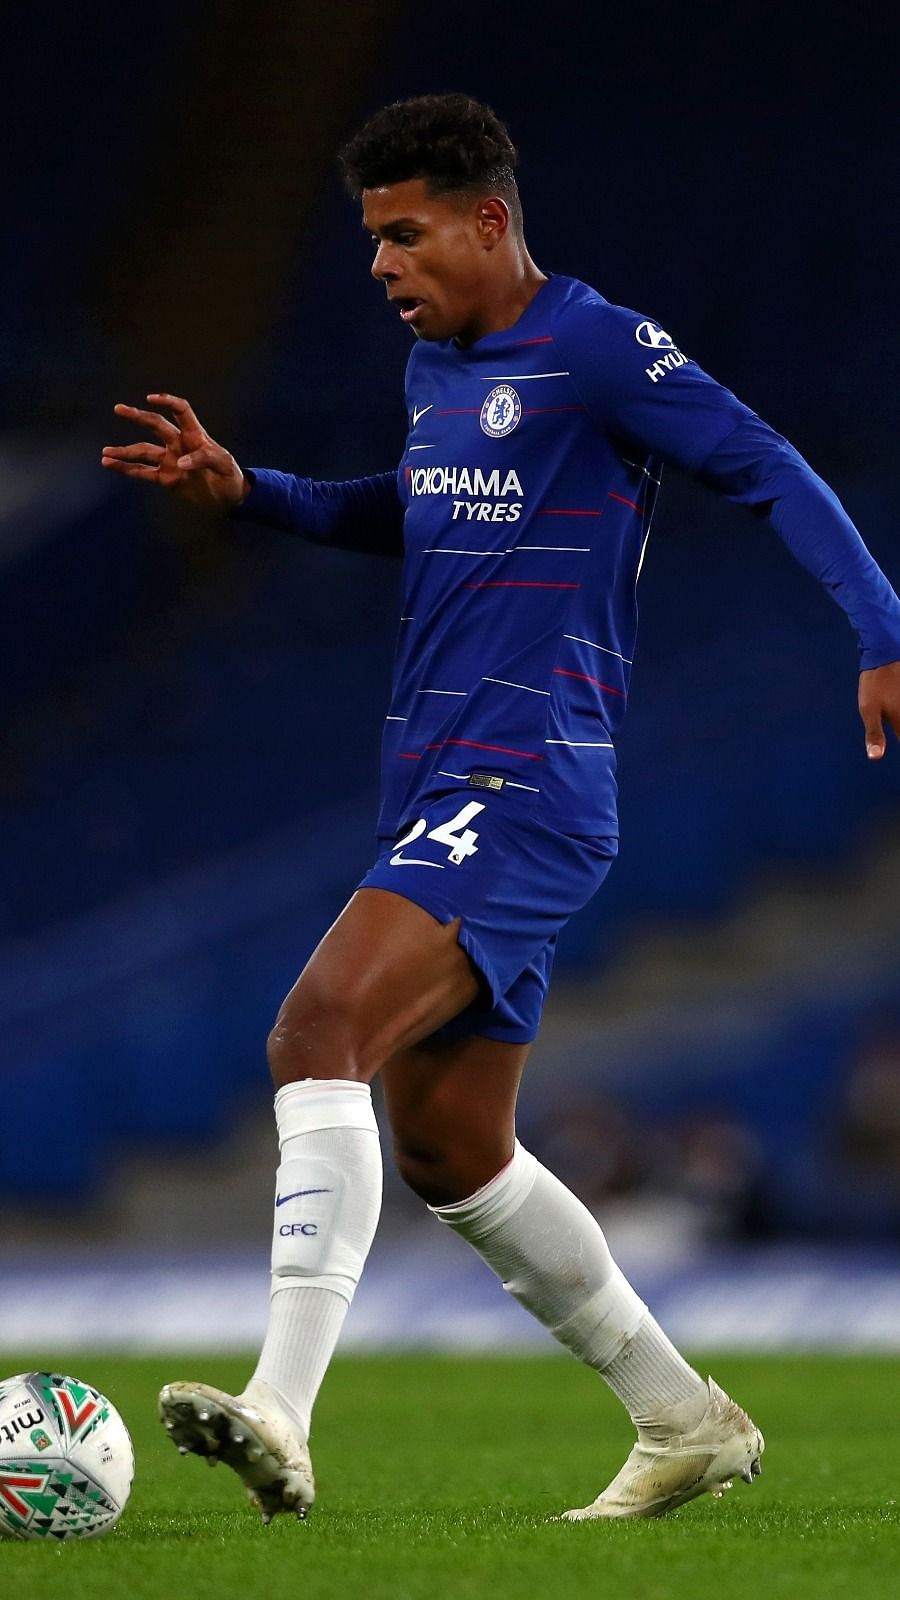 5 Chelsea Academy Players Who Could Break Into The First Team Next Season